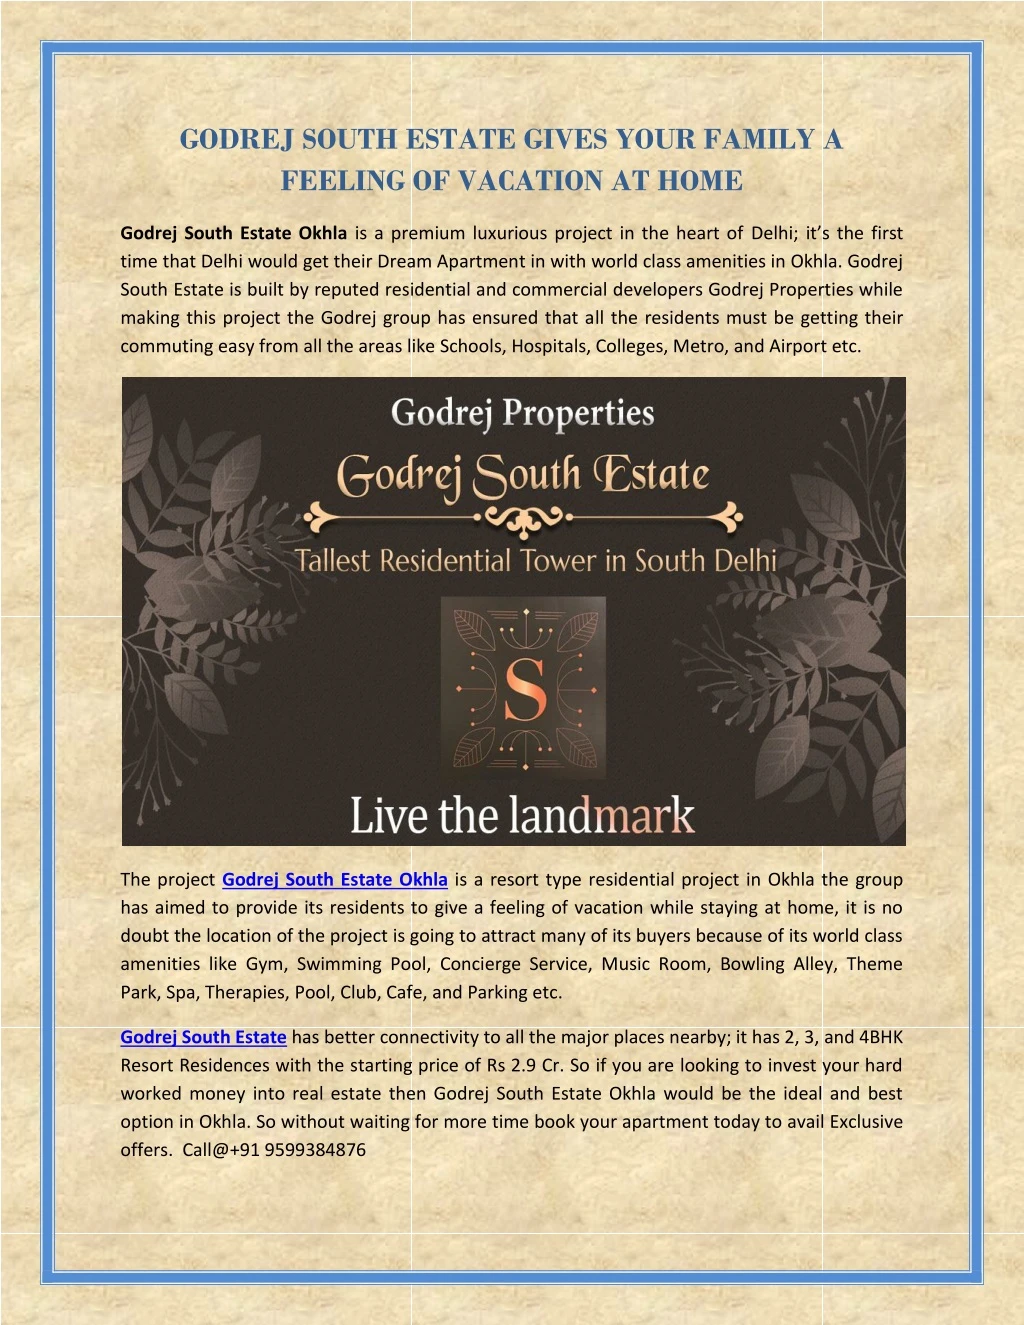 godrej south estate gives your family a feeling